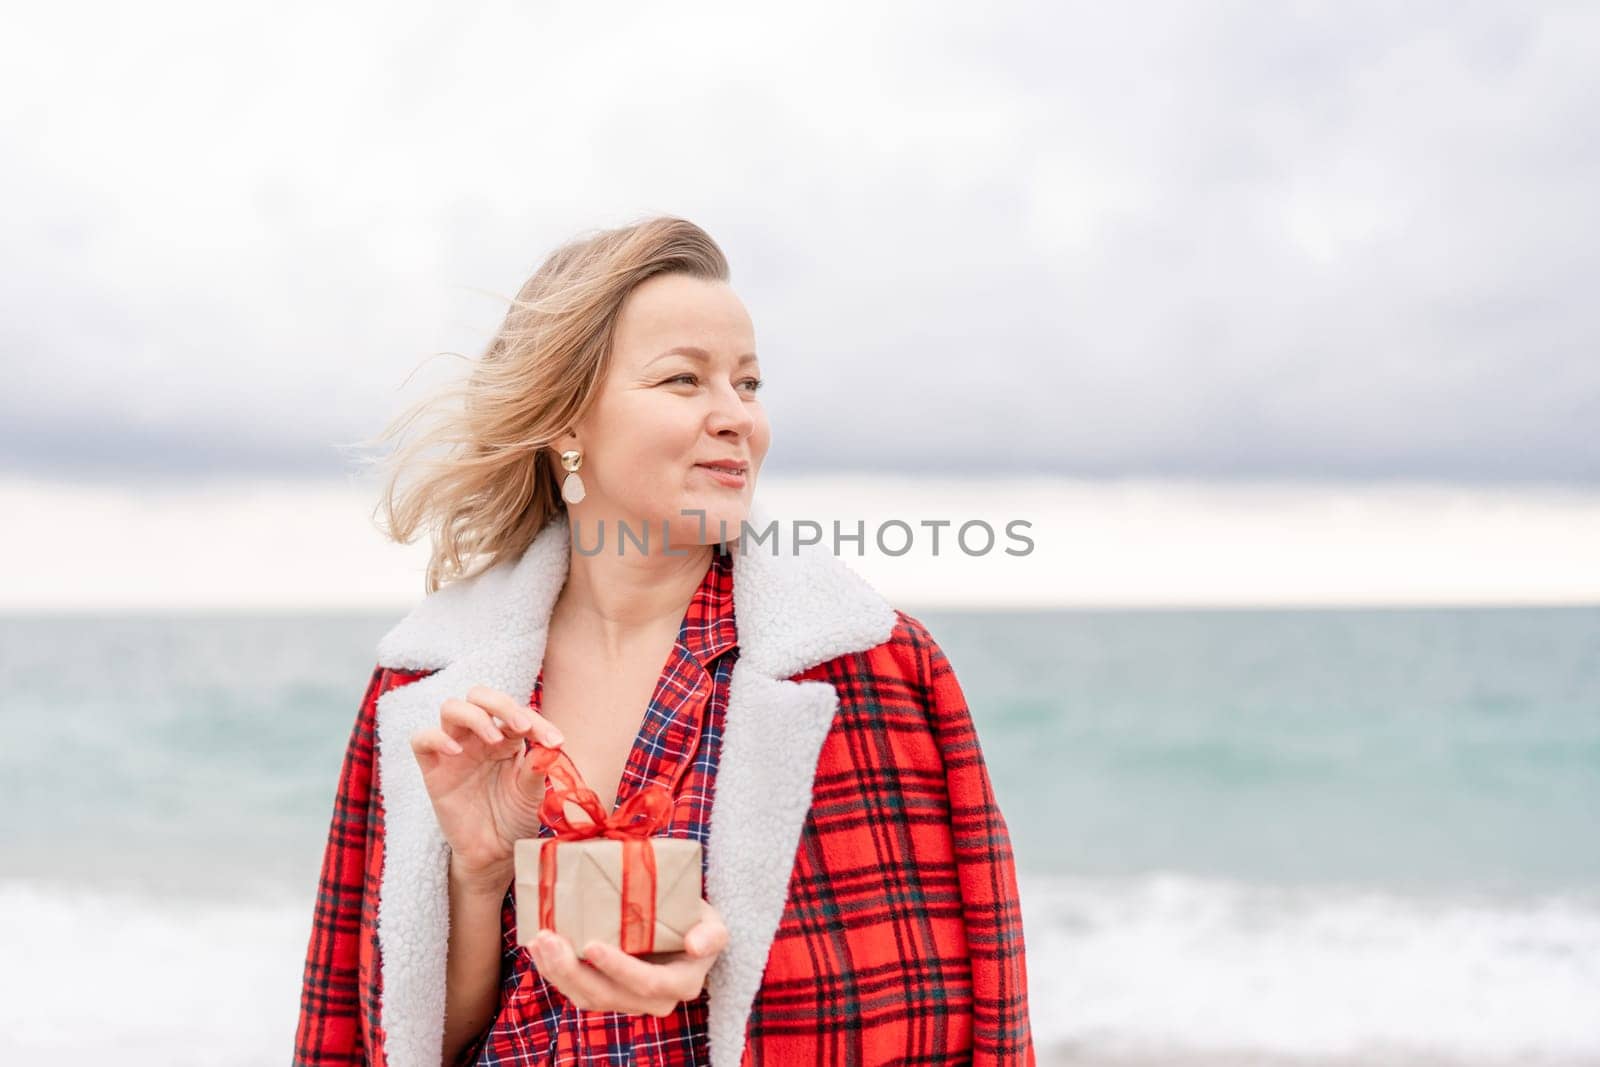 Lady in plaid shirt holding a gift in his hands enjoys beach. Coastal area. Christmas, New Year holidays concep by Matiunina